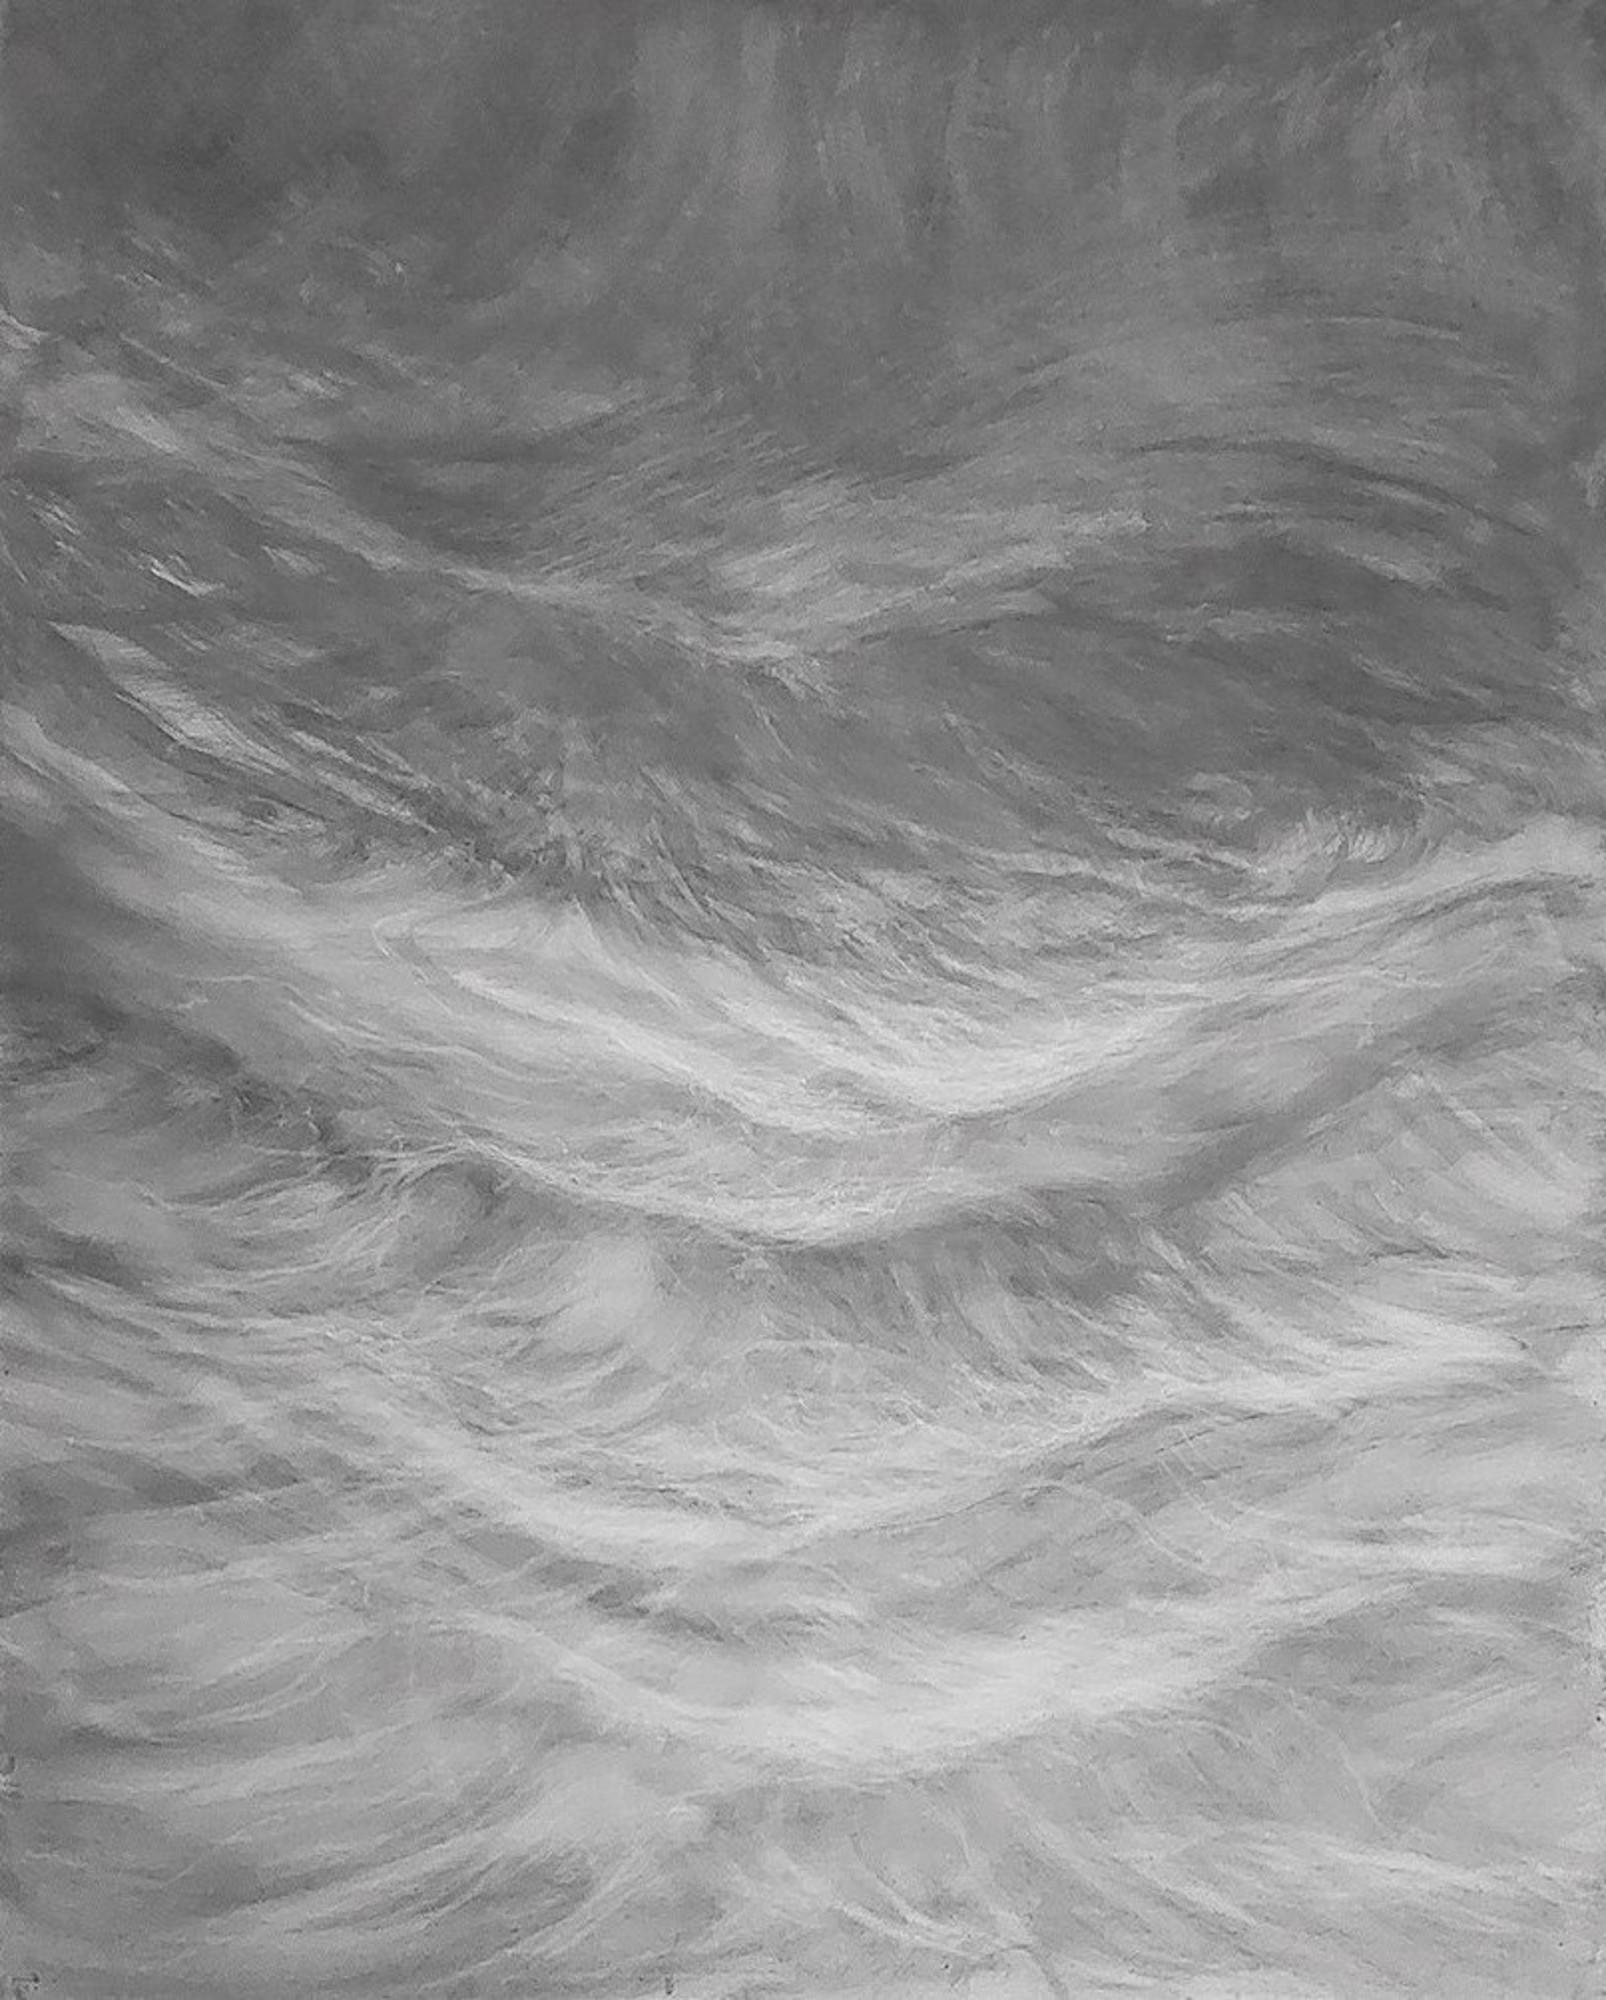 Waves is a unique graphite drawing on linen canvas by contemporary artist Franco Salas Borquez, dimensions are 118 × 91 cm (46.5 × 35.8 in). Dimensions of the framed artwork are 120 x 93 cm (47.2 x 36.6 in)
The artwork is signed, sold framed and